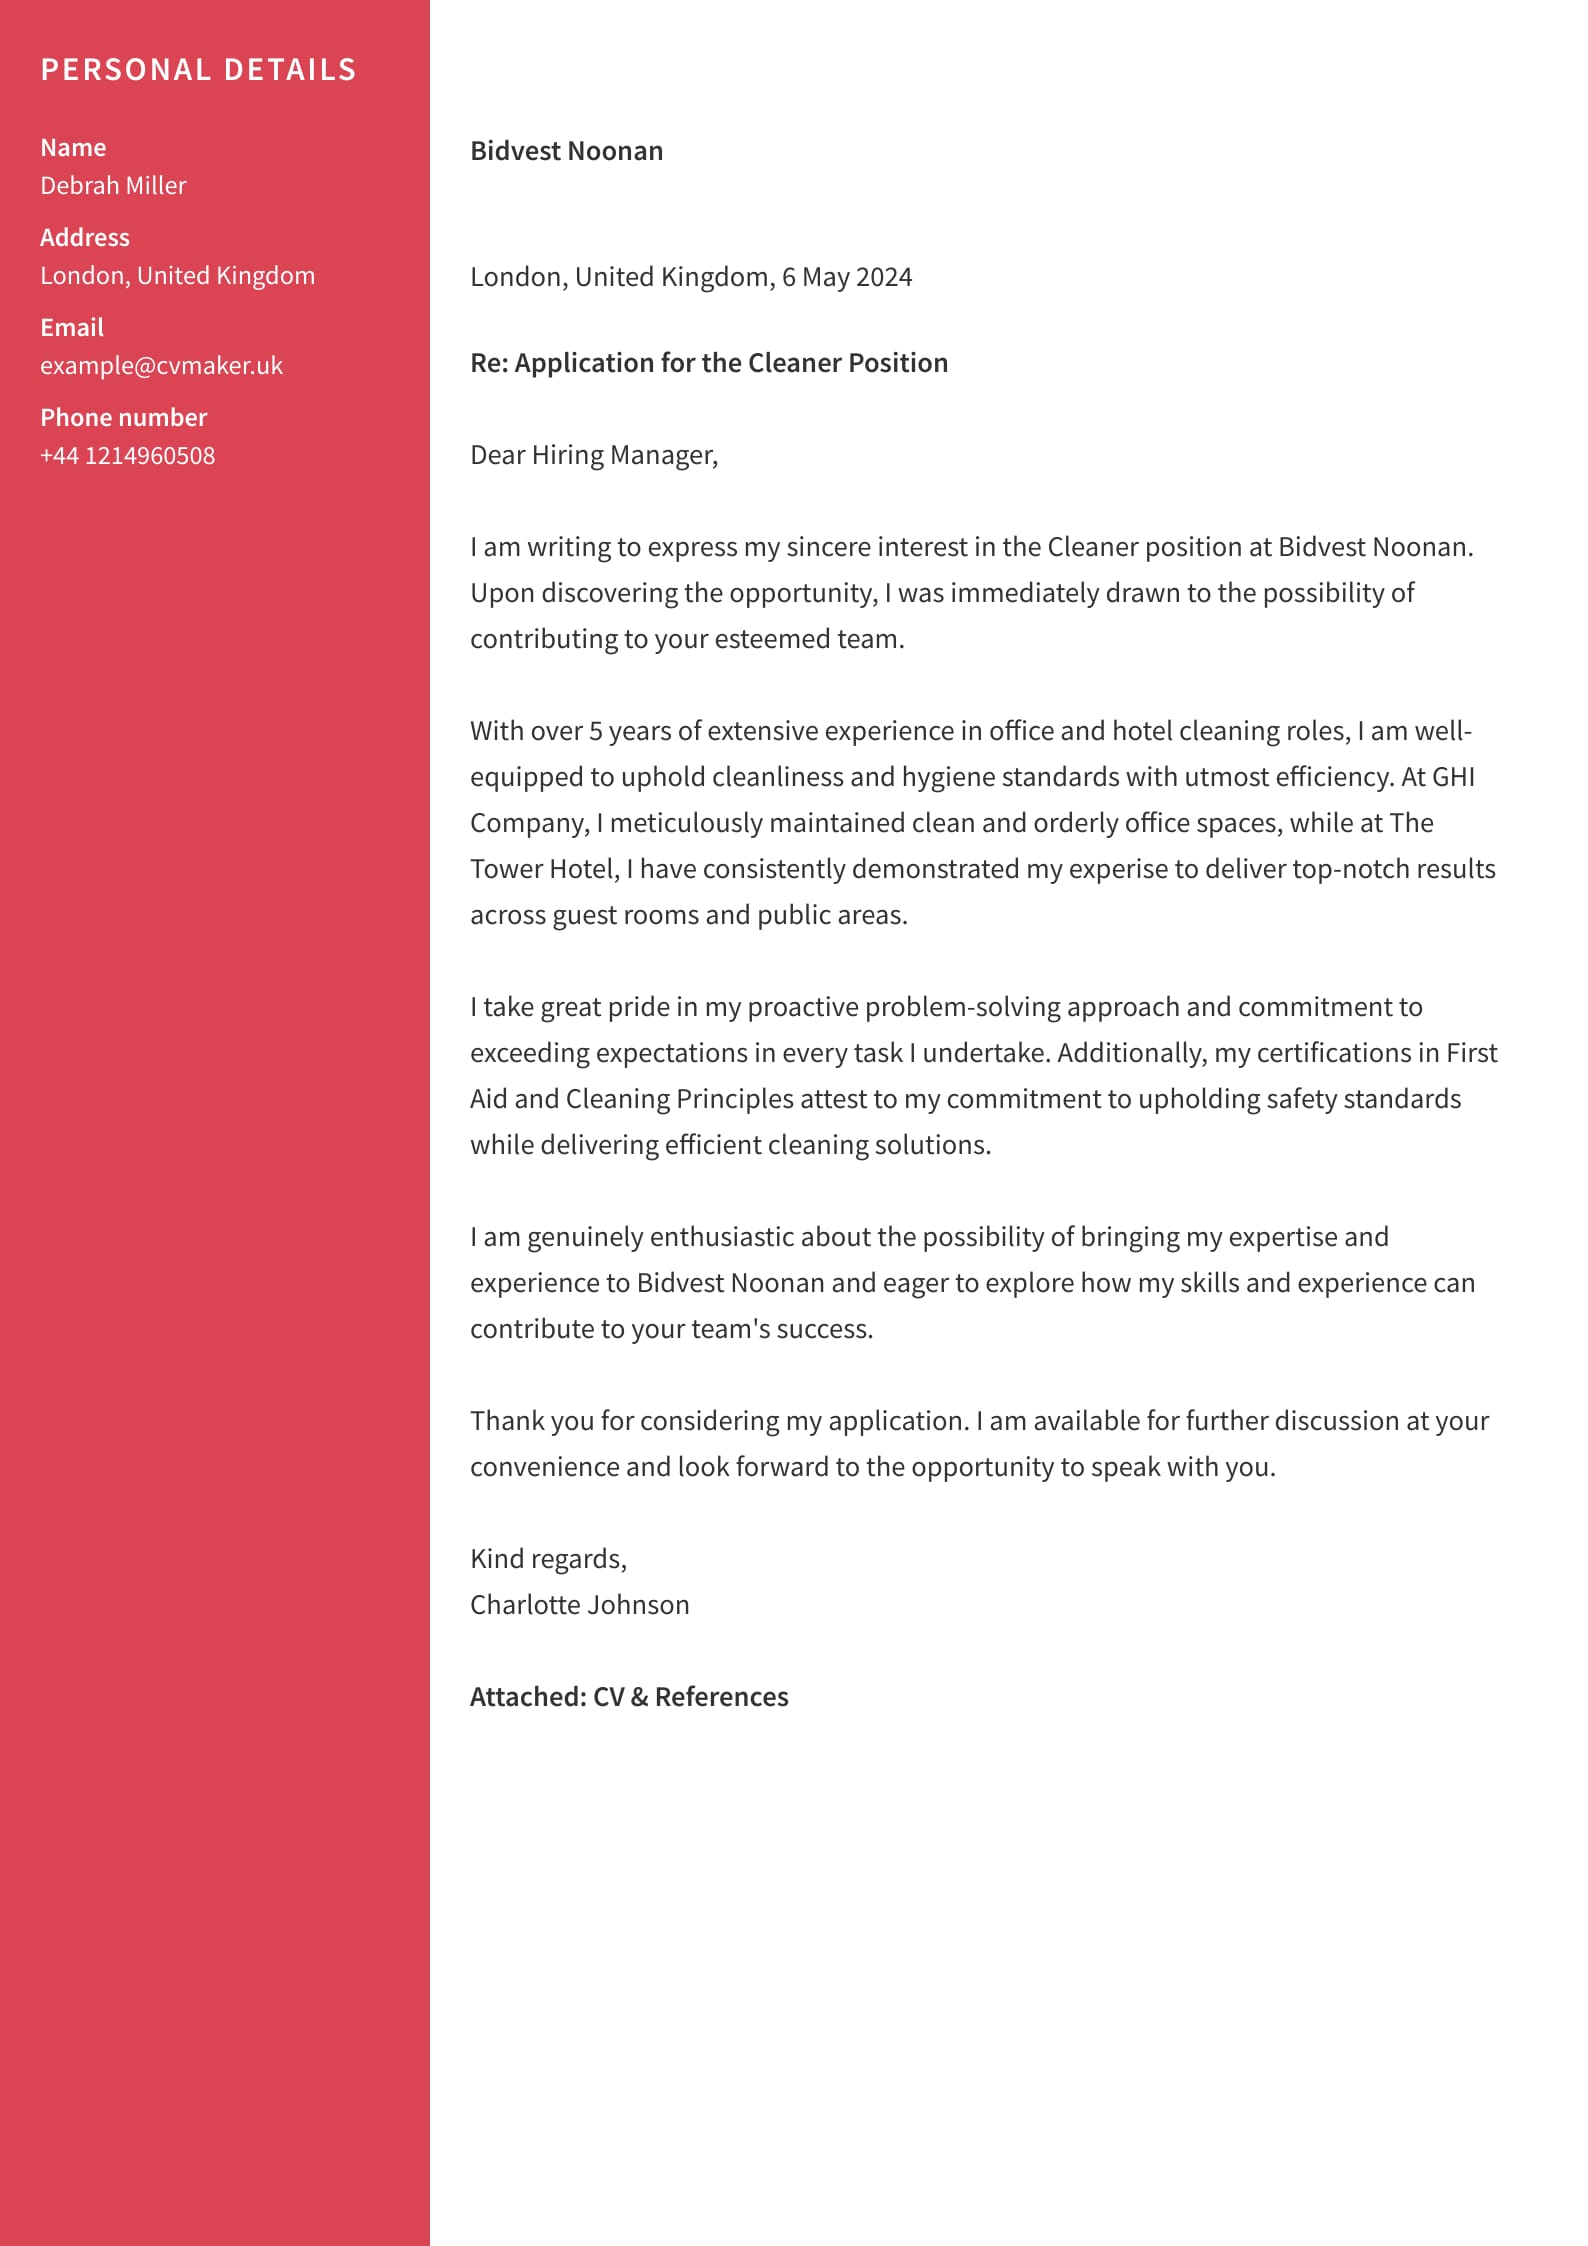 Cover letter example - Cleaner - Harvard template